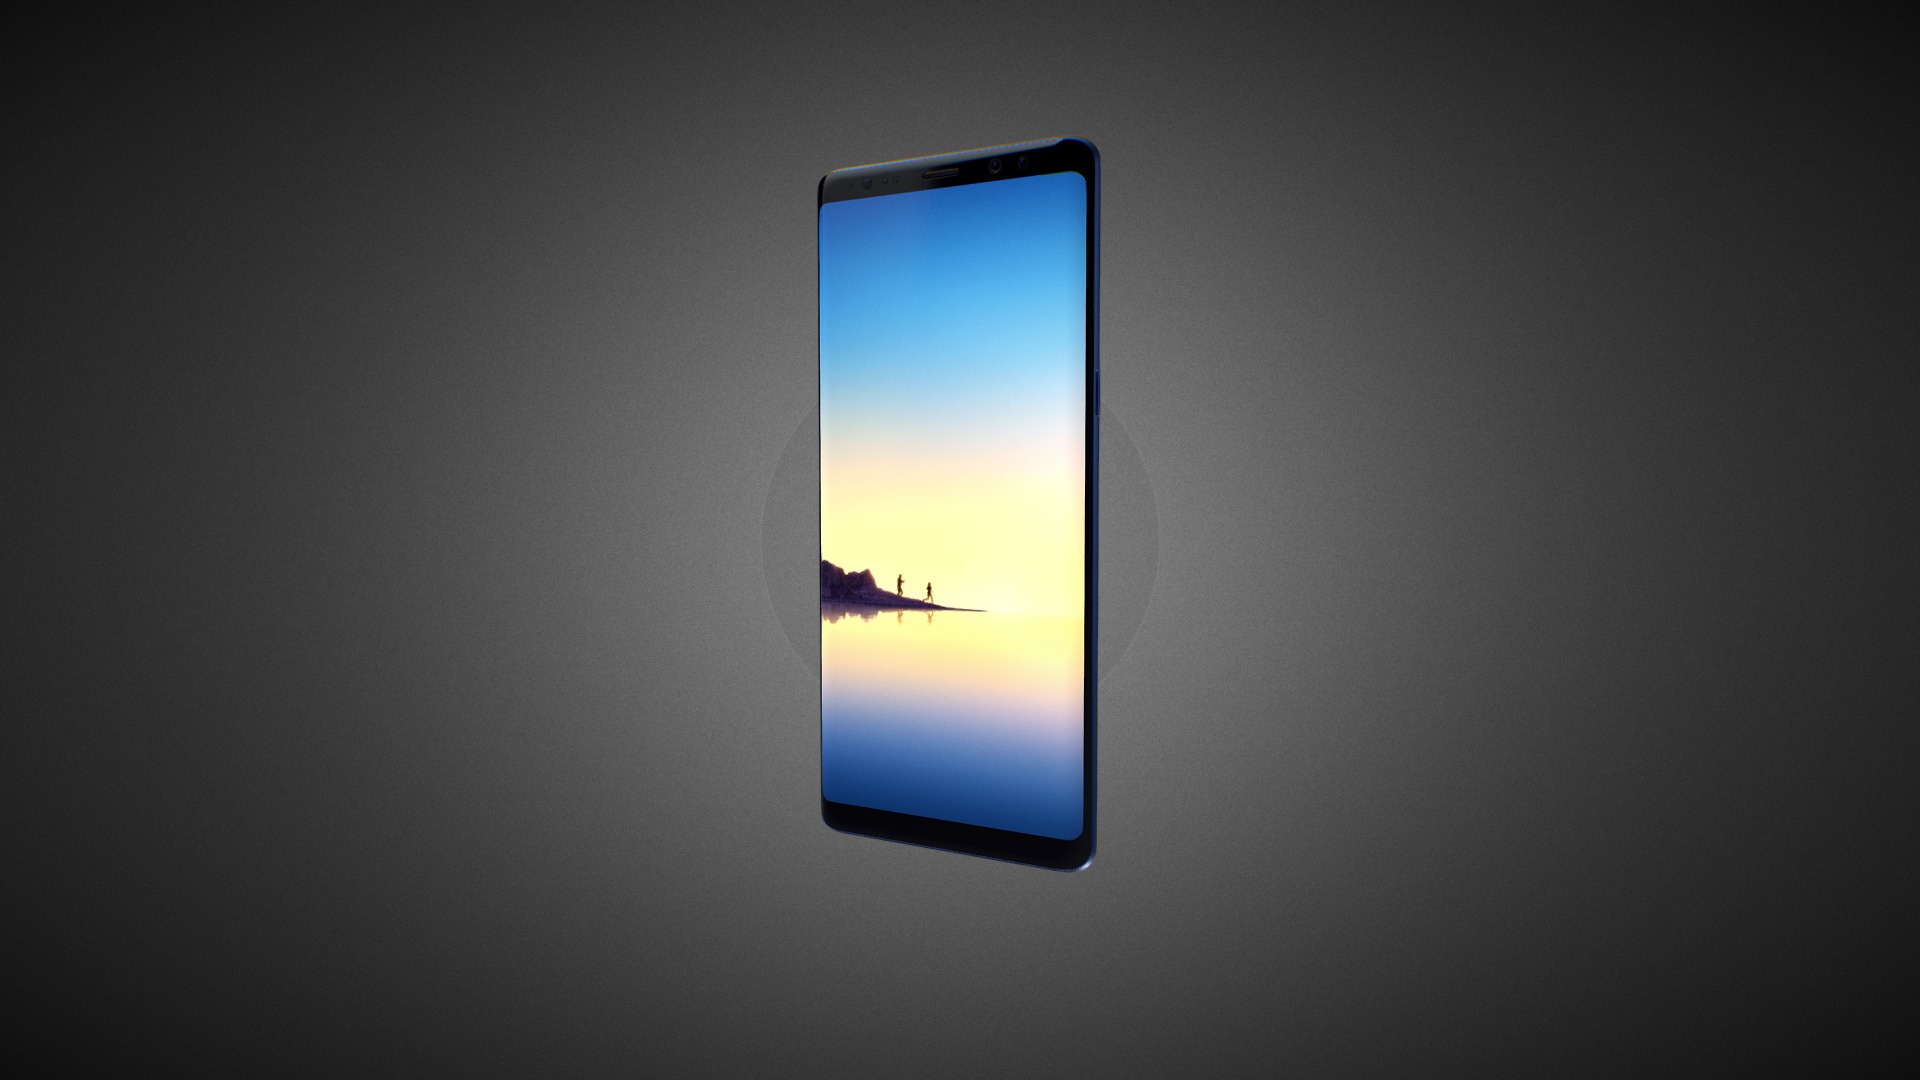 3D model Samsung Galaxy Note 8 for Element 3D - This is a 3D model of the Samsung Galaxy Note 8 for Element 3D. The 3D model is about a cell phone with a blue screen.